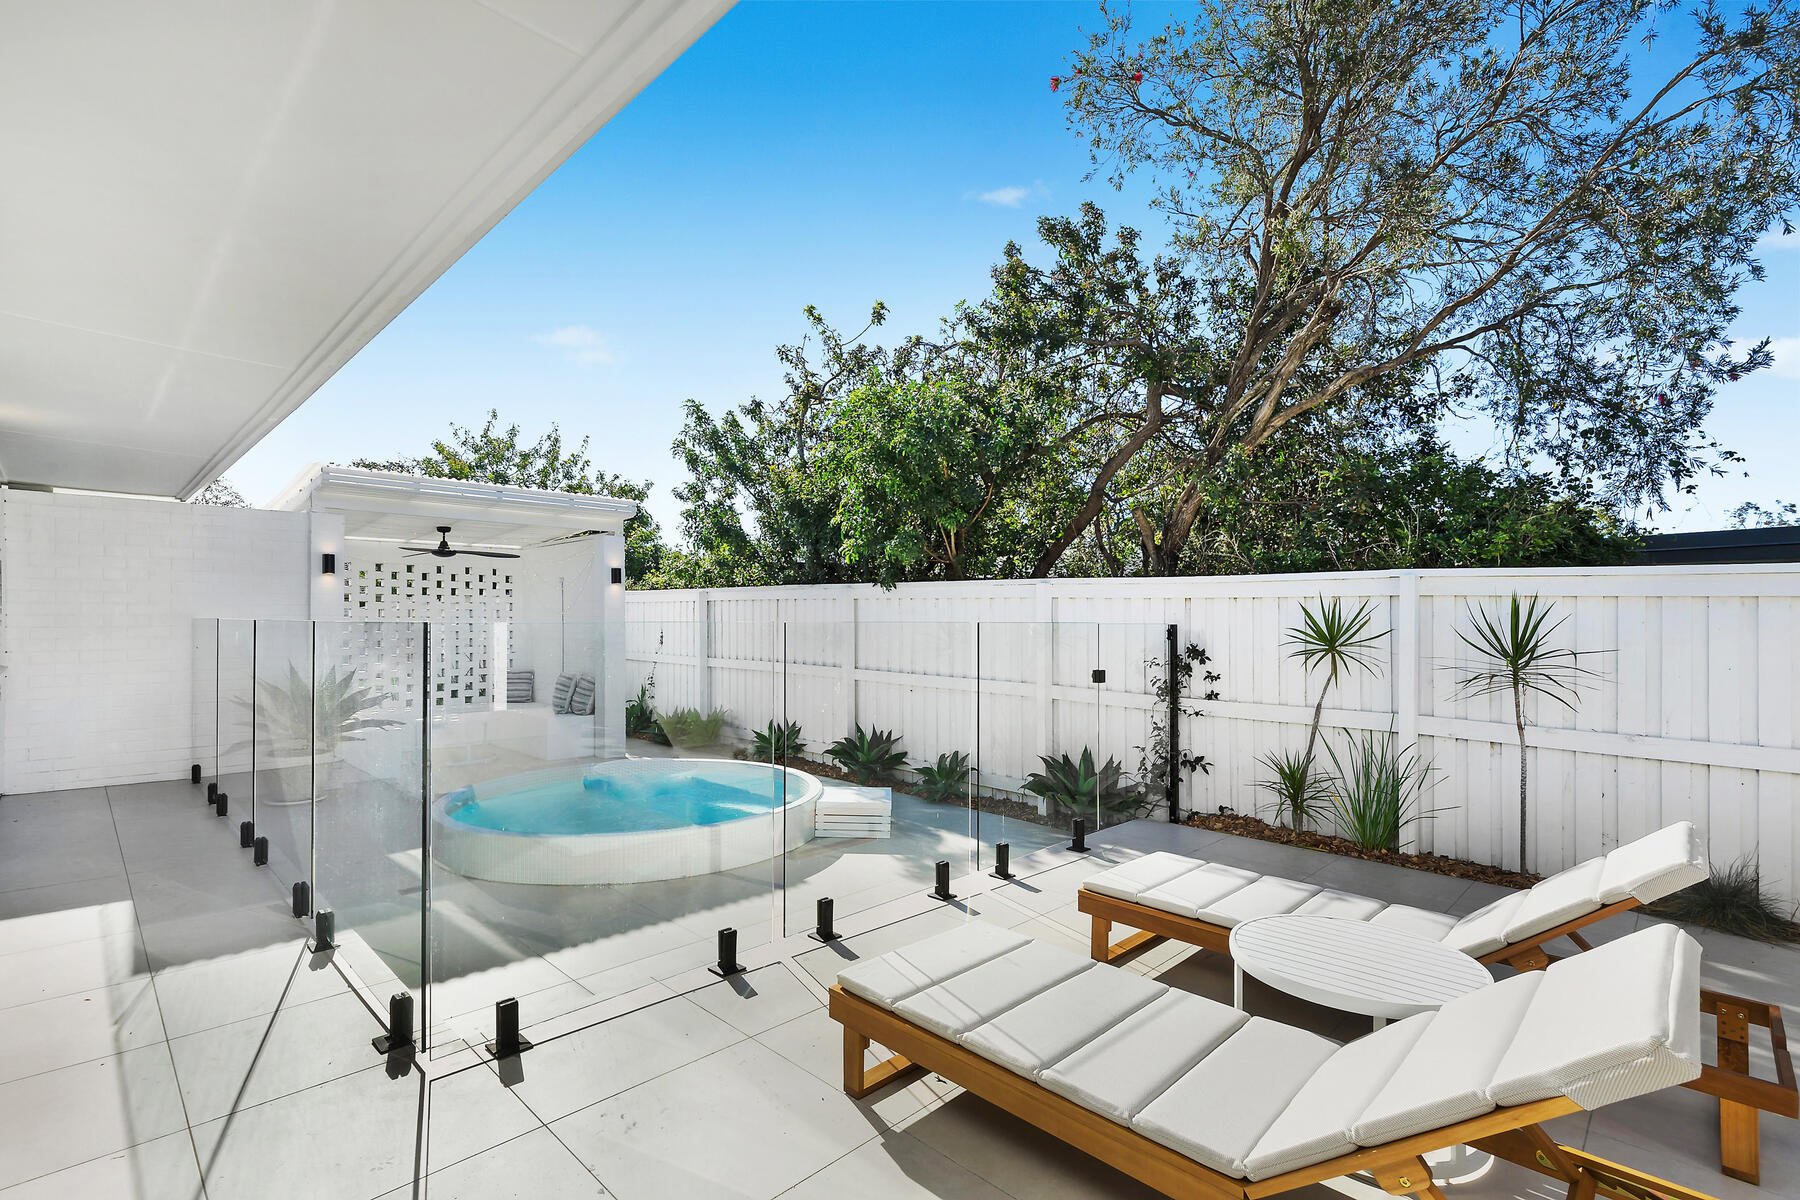 Two sun lounges facing an in ground plunge pool, with white breeze block cabana opposite.